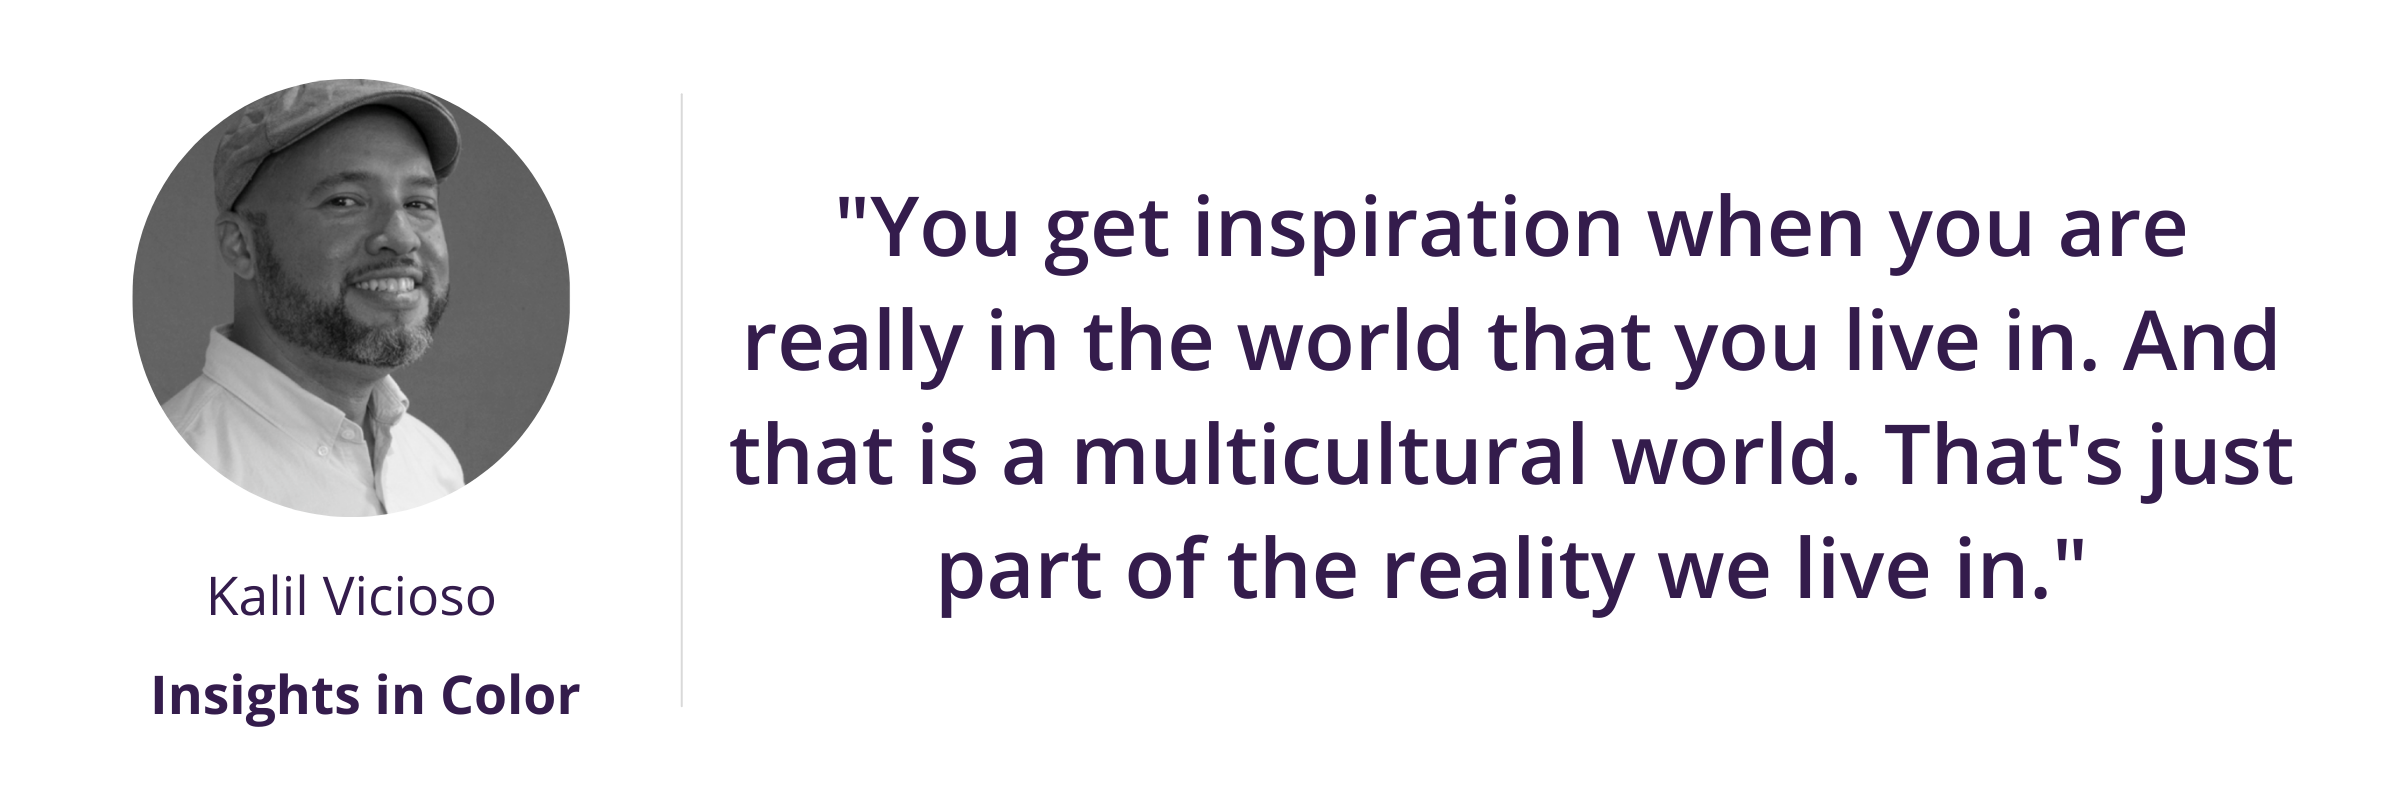 "You get inspiration when you are really in the world that you live in. And that is a multicultural world. That's just part of the reality we live in."